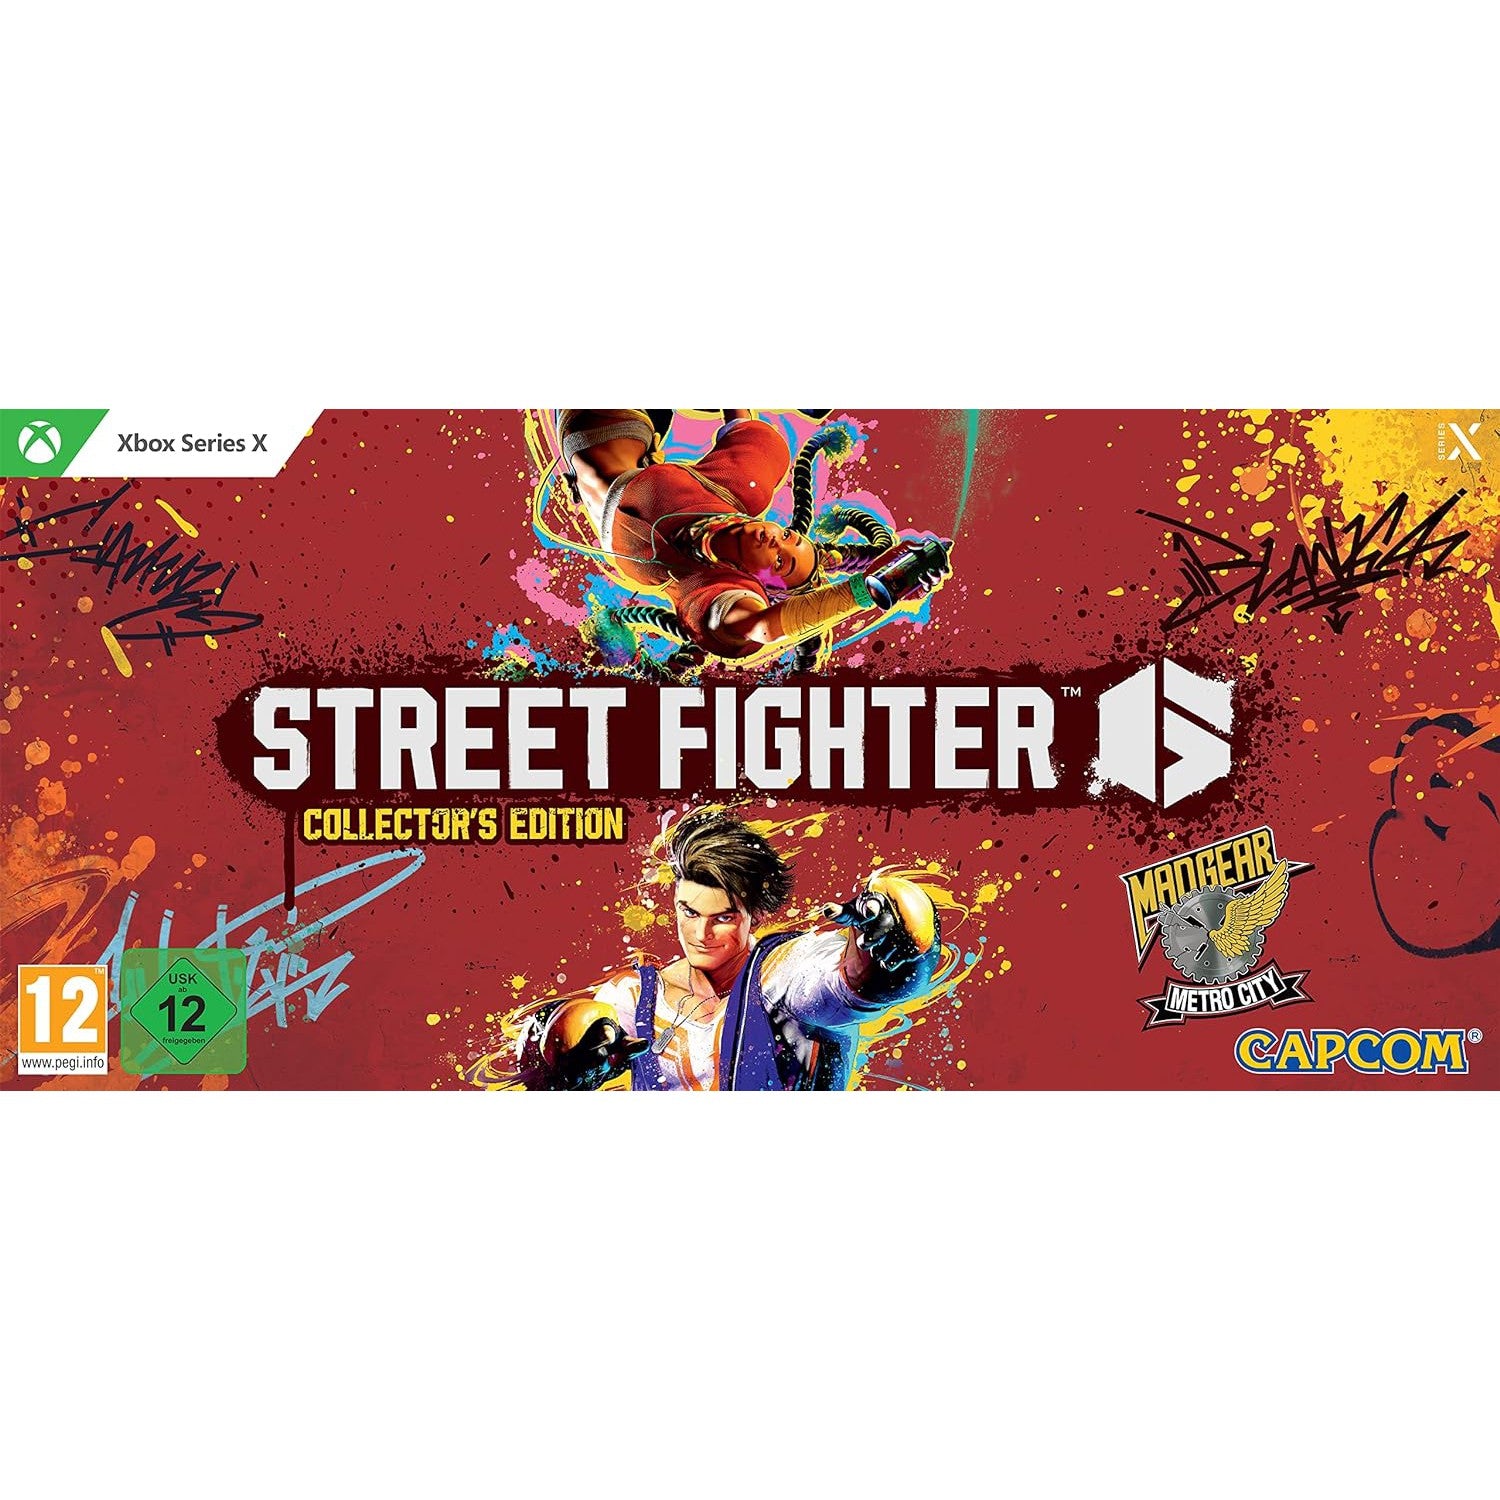 Street Fighter V Collector's Edition, Capcom, PlayStation 4, [Physical] 